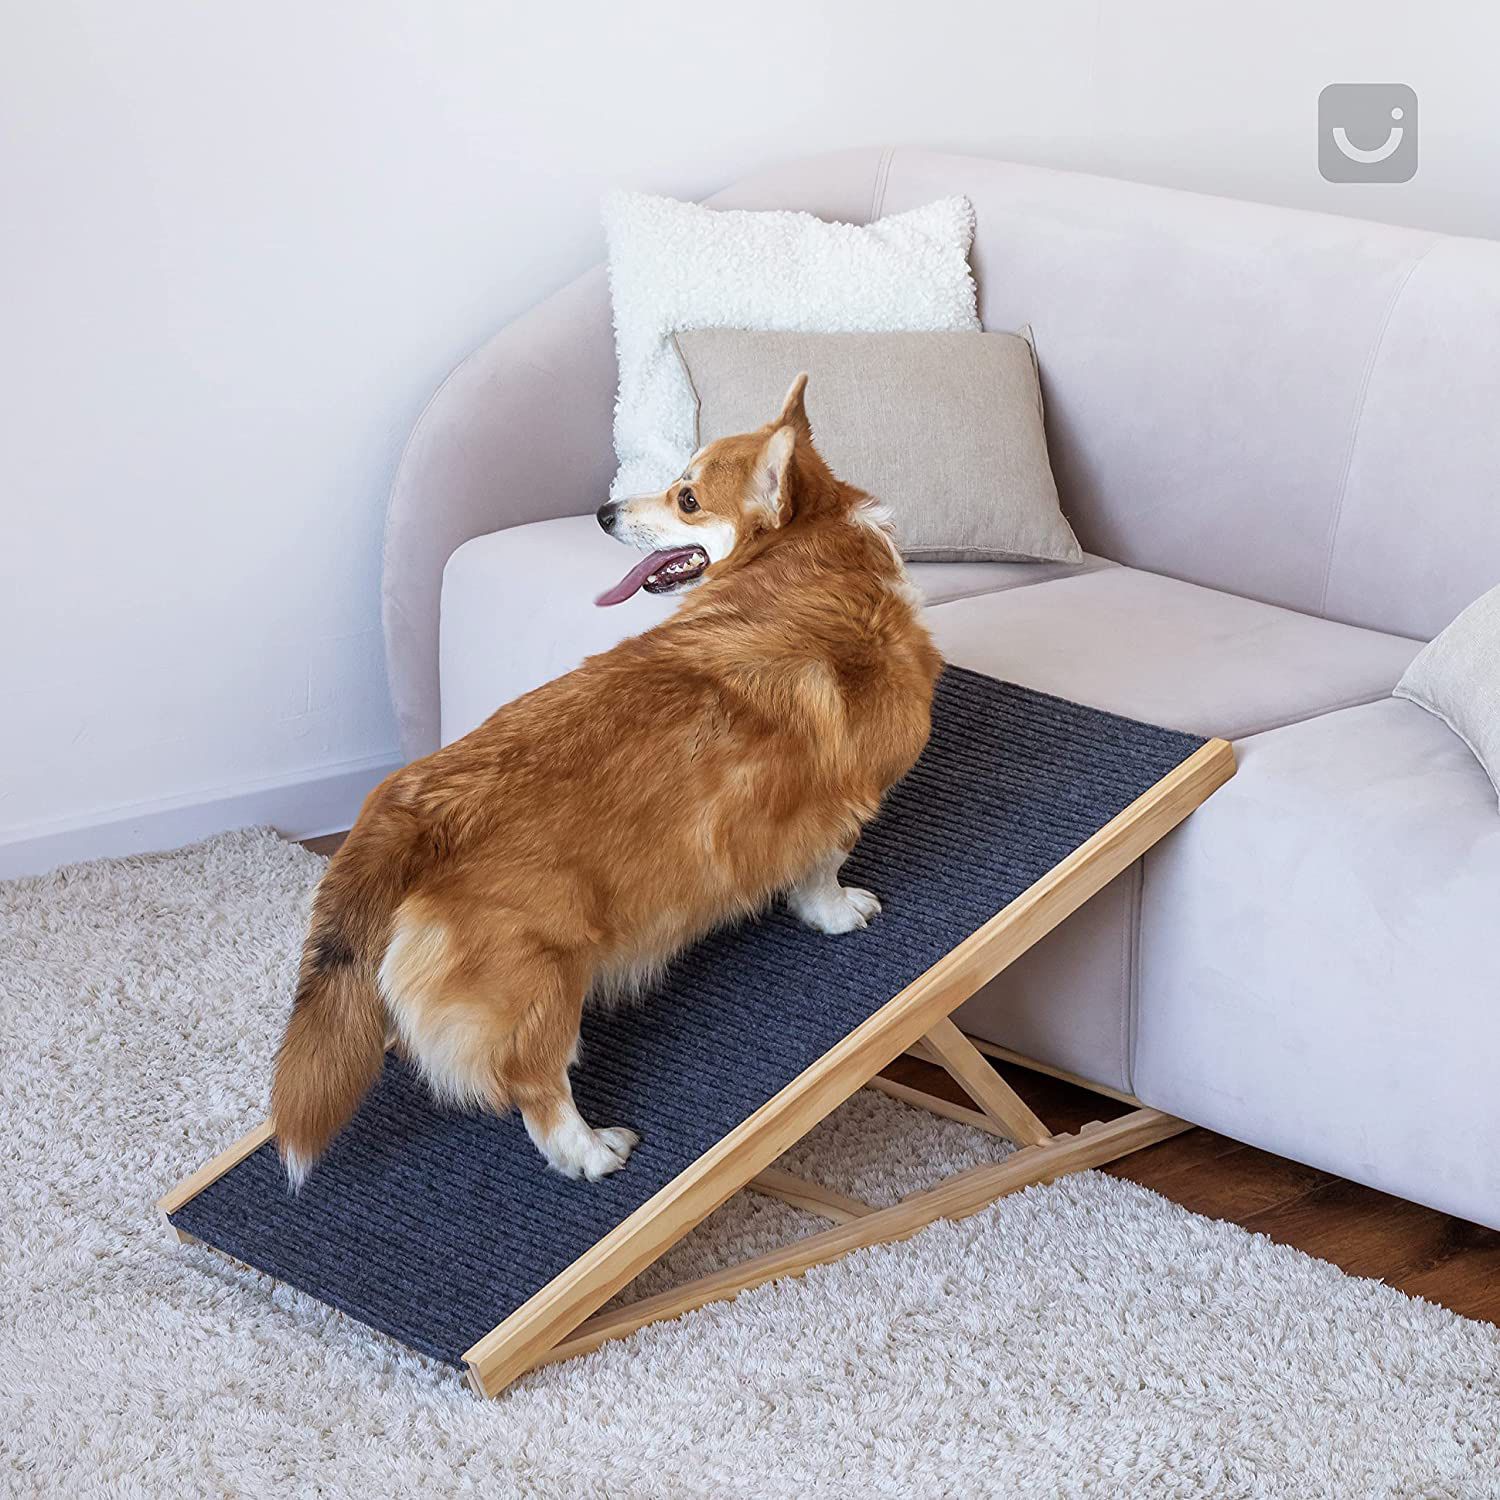 Adjustable Ramp For Dog Cat To Bed Couch Car Non Slip Surface